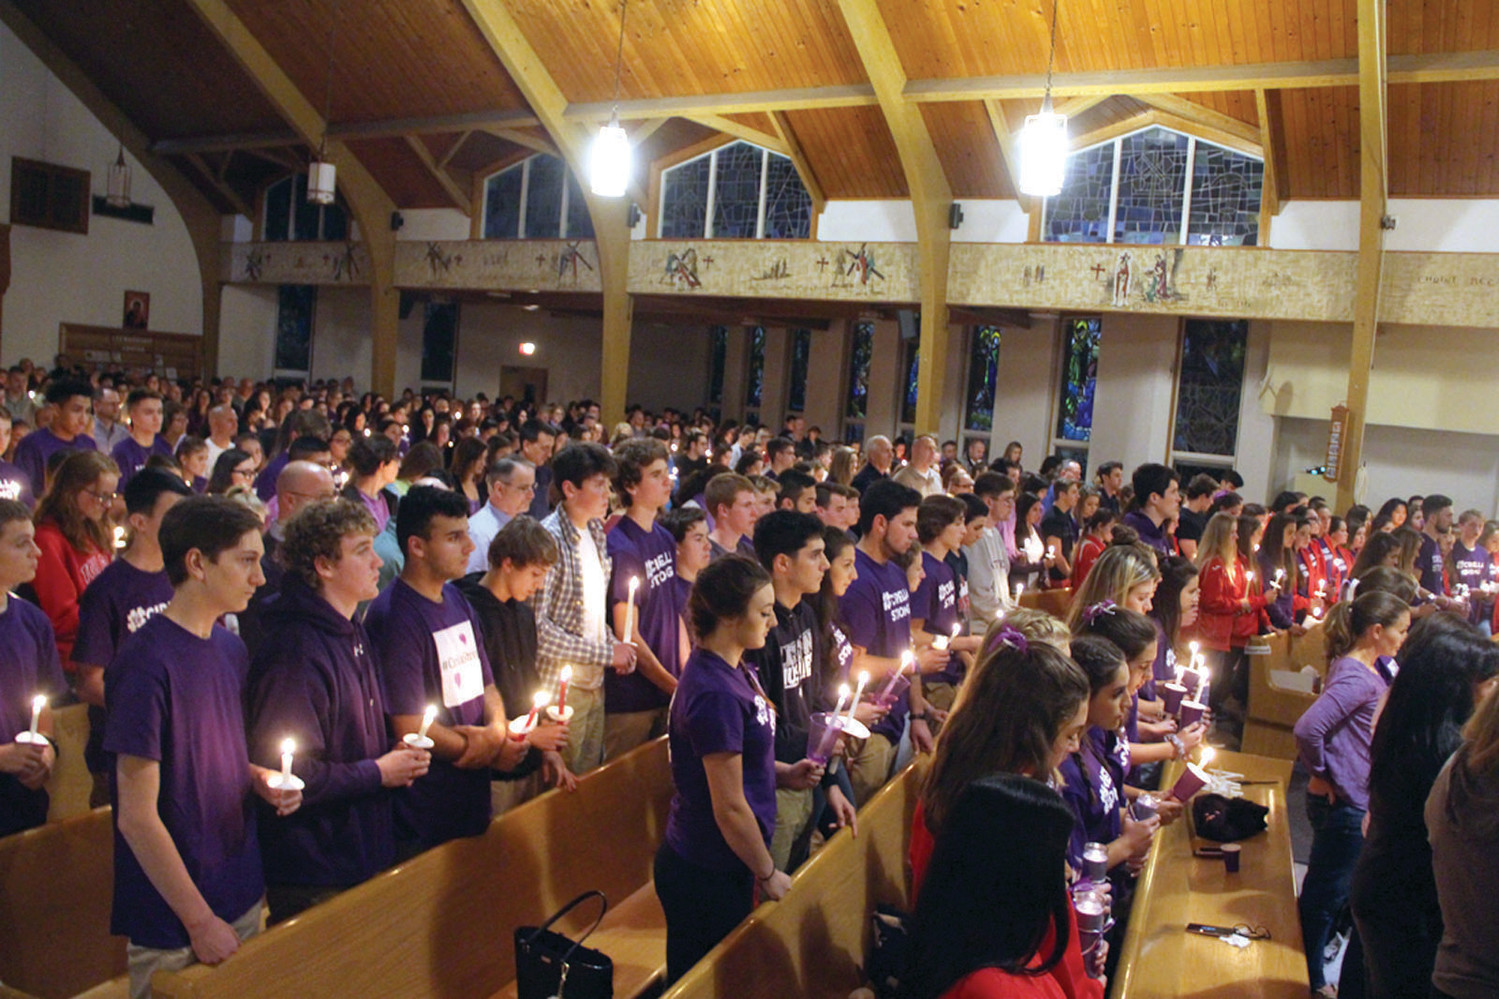 LIGHTS FOR CIRELLA: St. Gregory the Great Church in Cowesett was filled for Friday’s vigil for 16-year-old Gianna Cirella, who died last Wednesday.